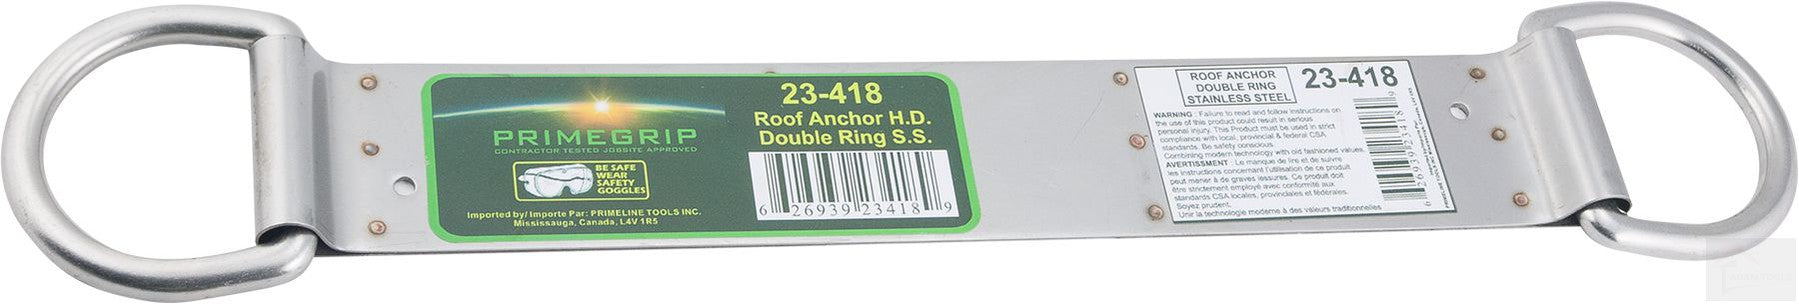 PRIMEGRIP Double Ring Roof Anchor [23-418]